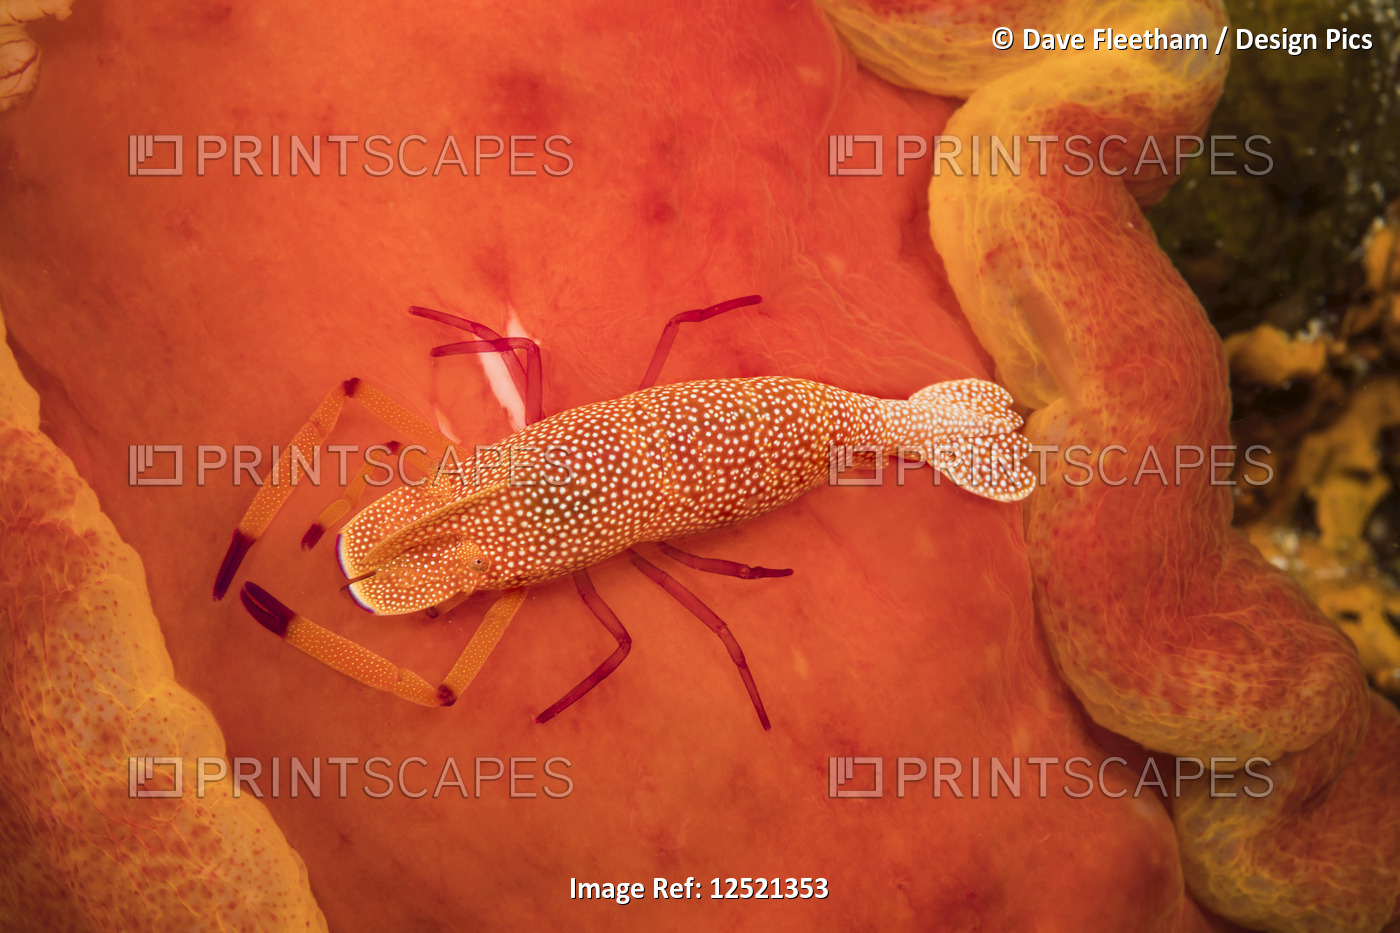 An Imperial commensal shrimp (Periclimenes imperator), photographed at night on ...